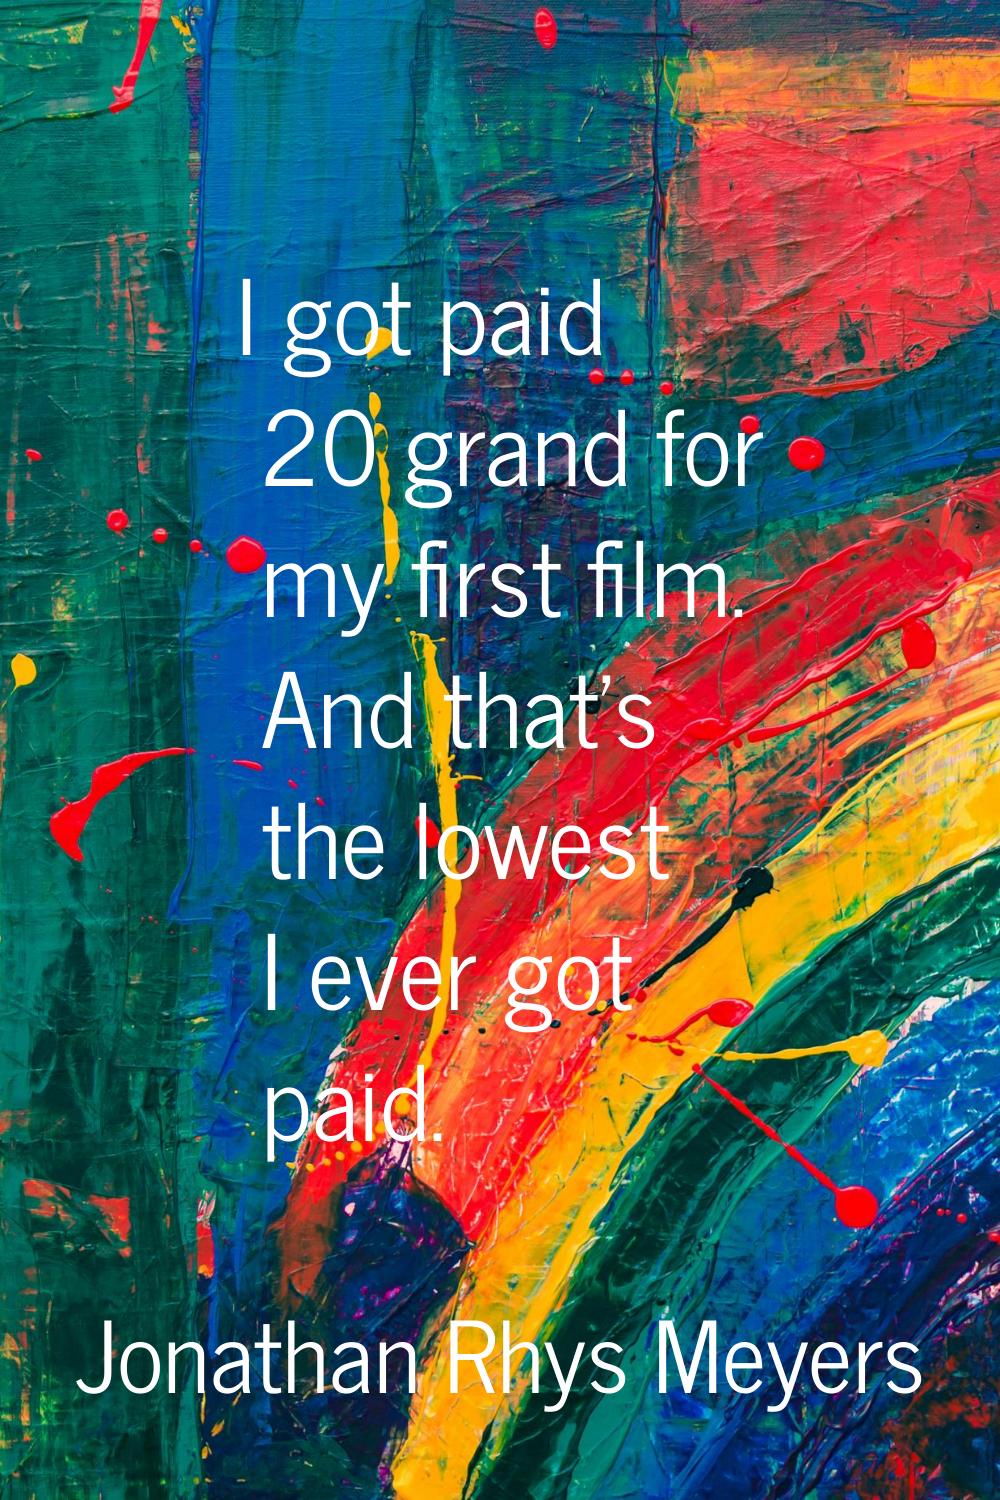 I got paid 20 grand for my first film. And that's the lowest I ever got paid.